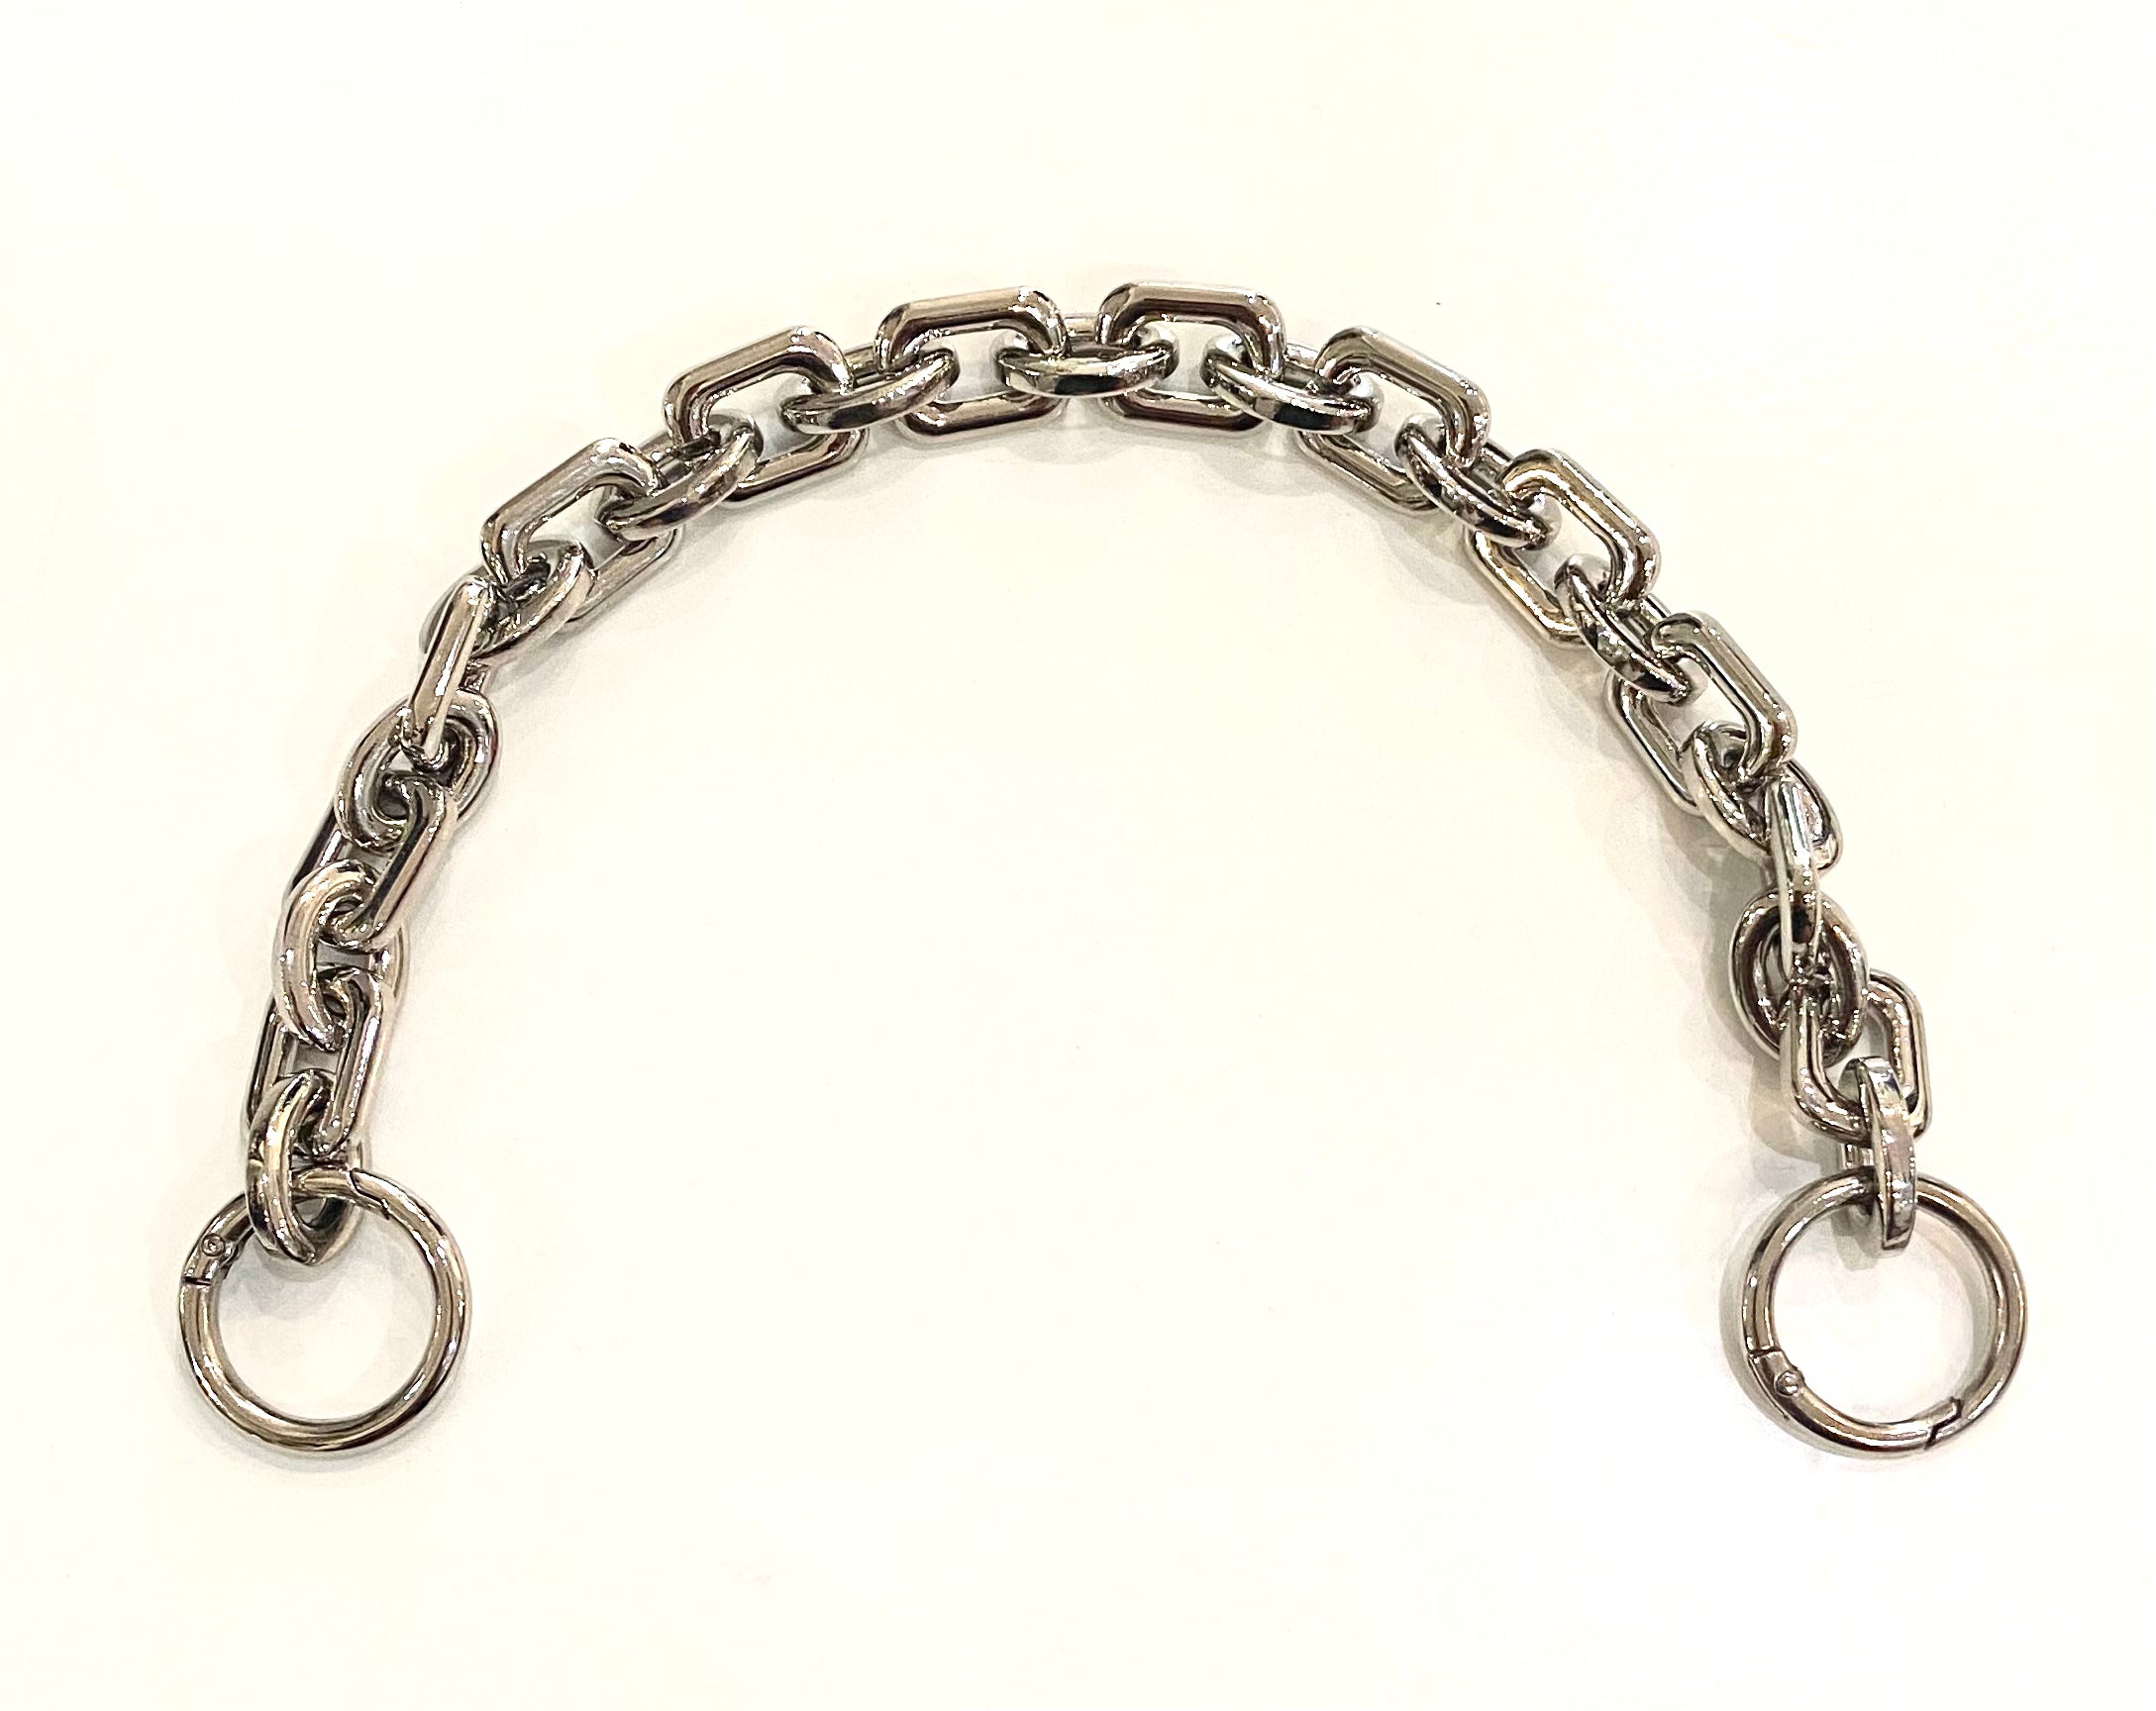 Short Silver Square/Round Link Bag Chain